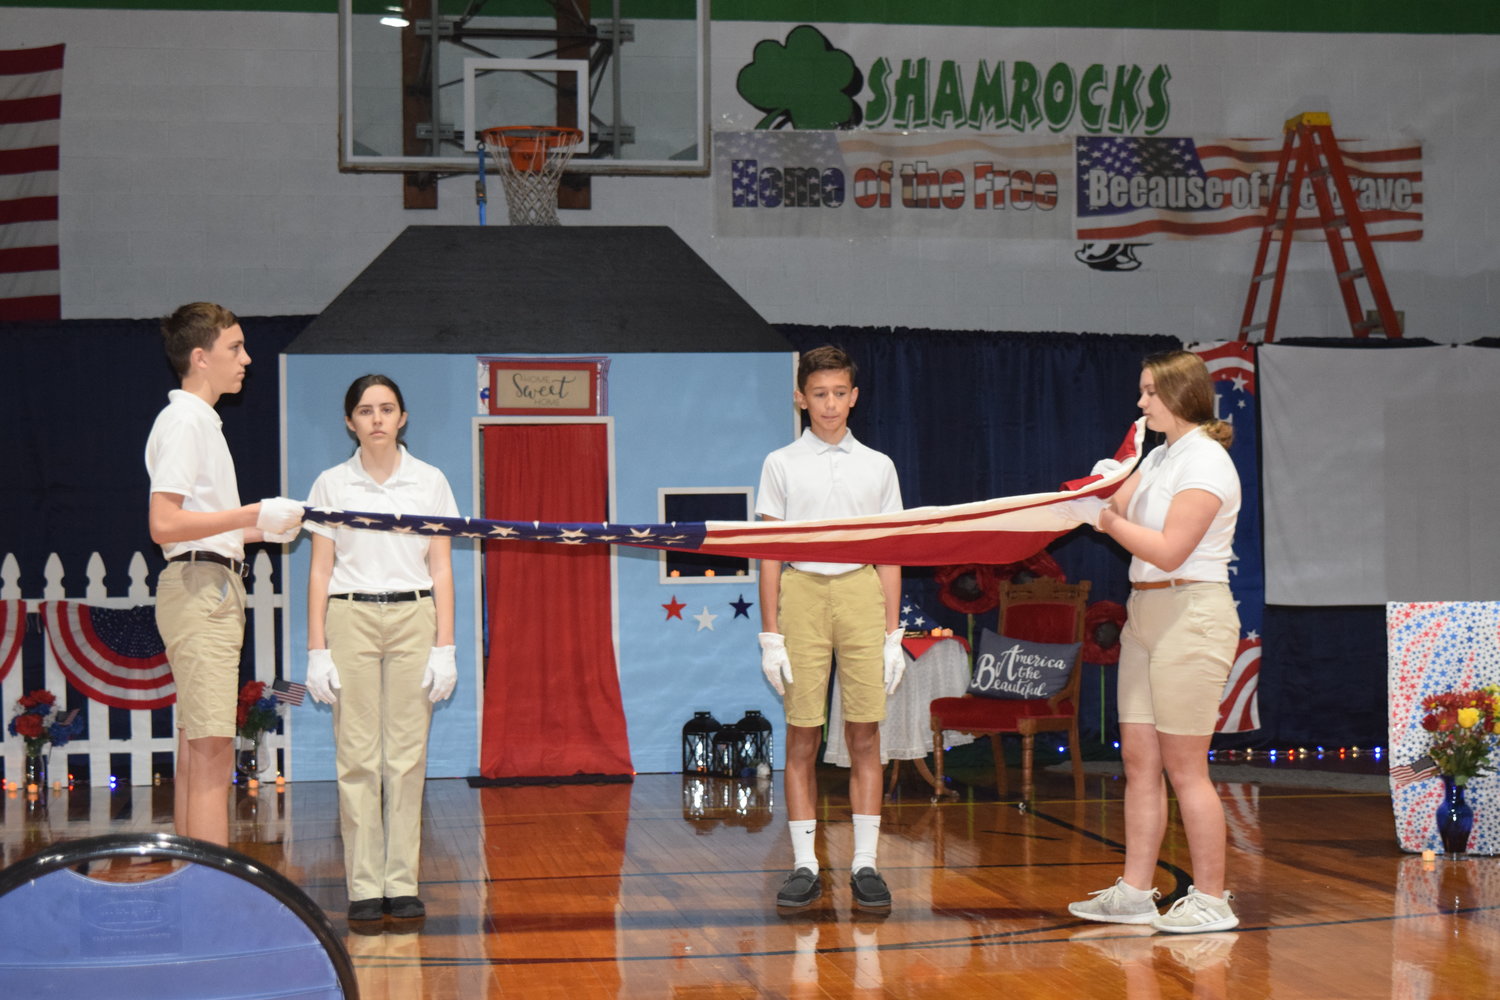 Middle school students at Holy Family School in Hannibal demonstrate the folding of the U.S. Flag and explain the significance of each of the 13 folds during the school’s veterans celebration the day before Veterans Day.